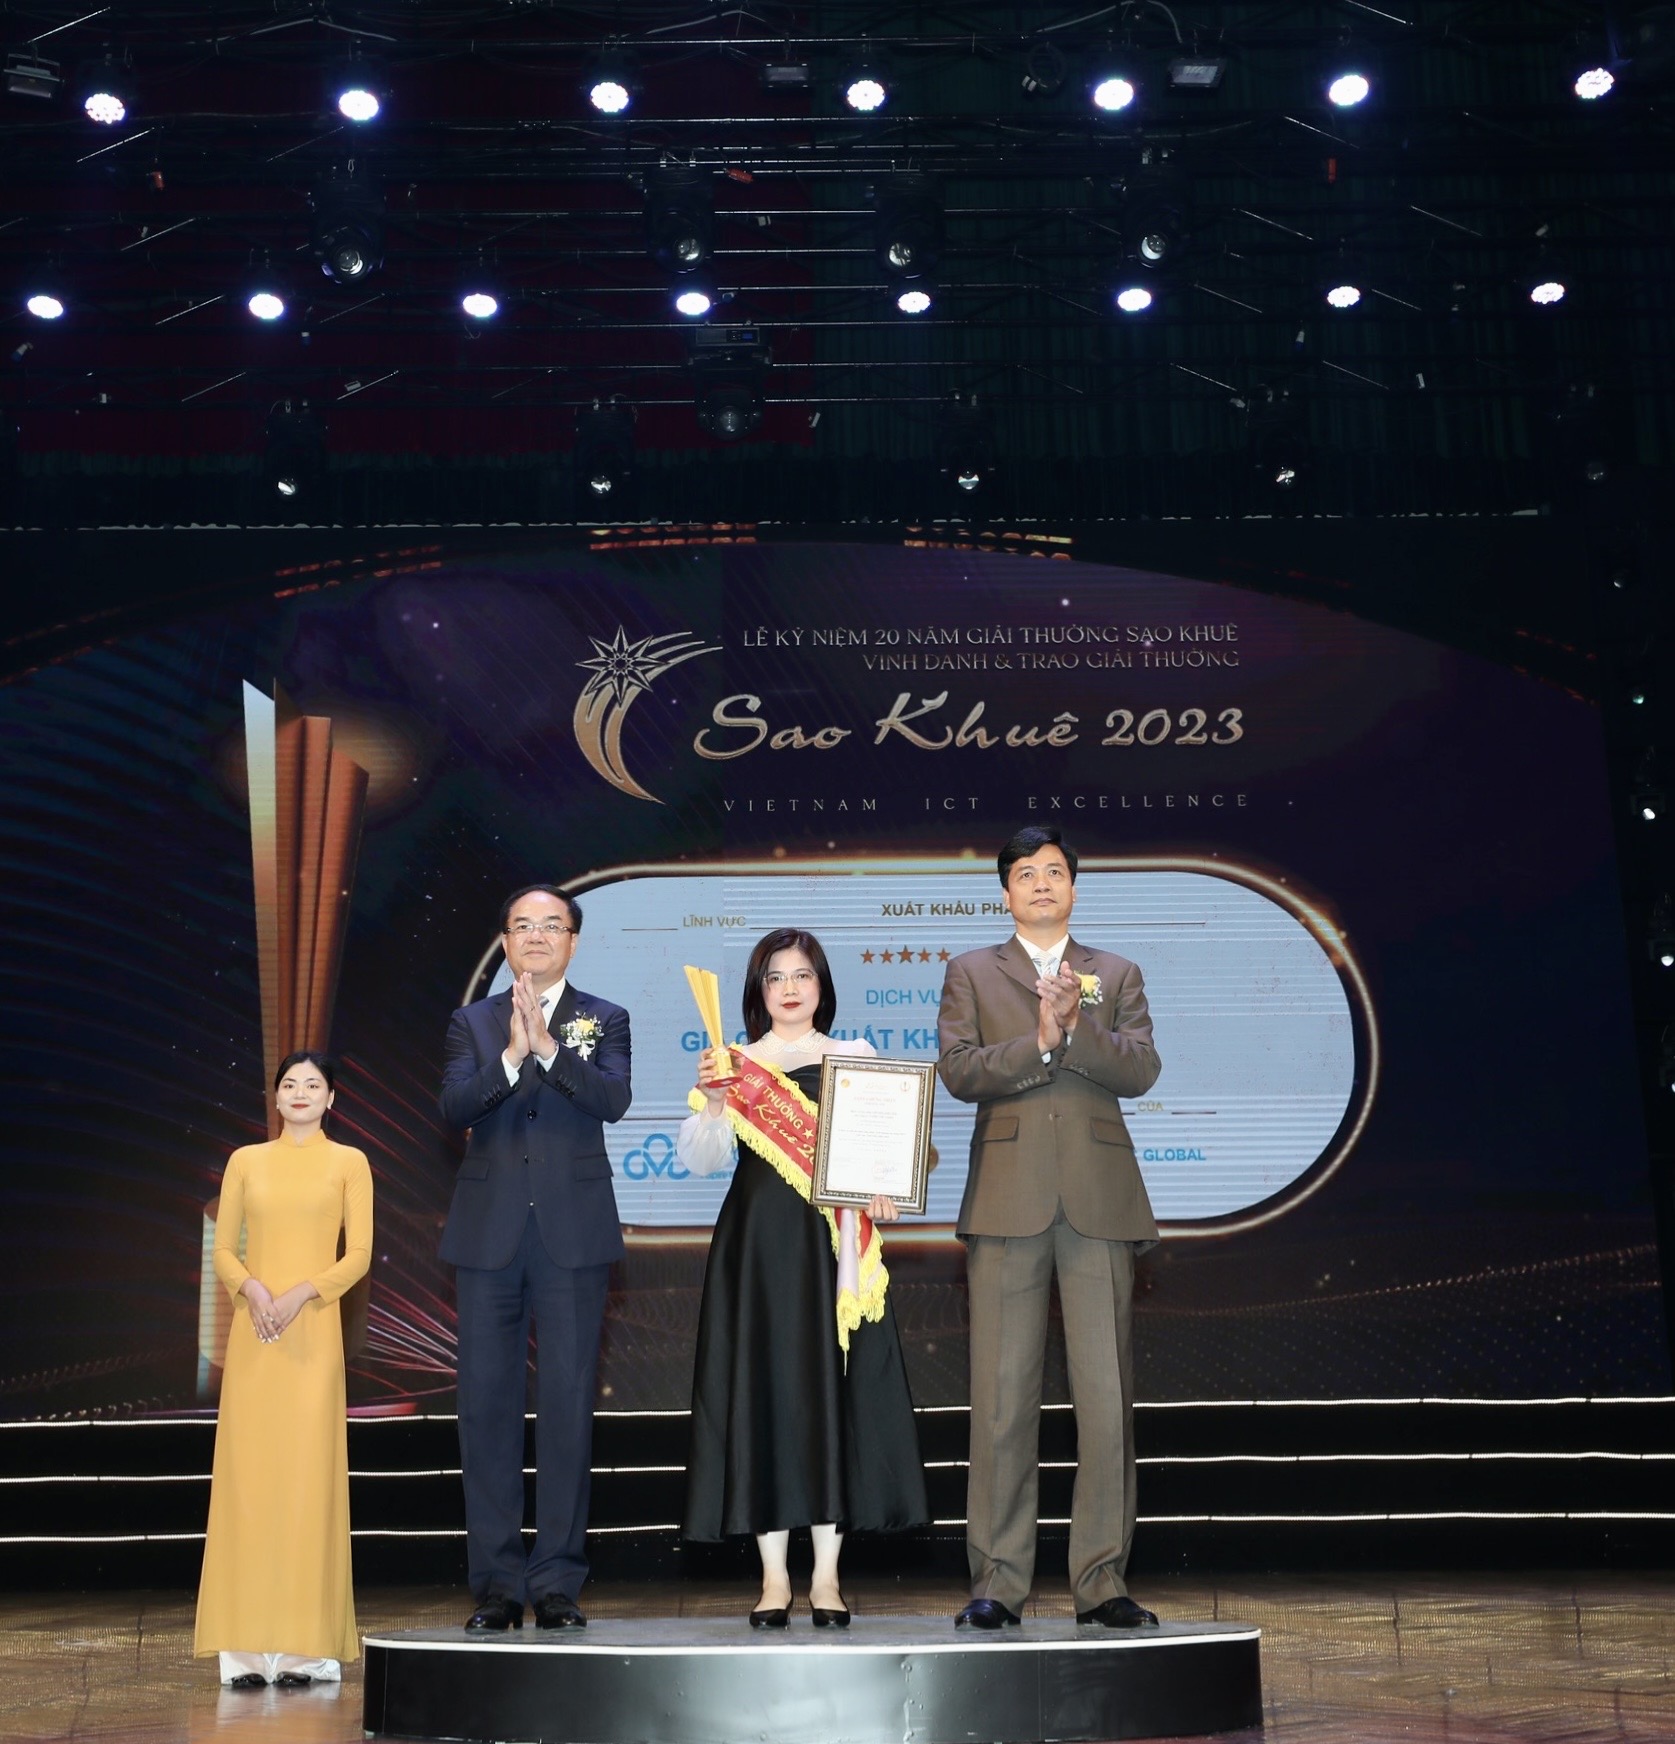 CMC Global affirms its position with Sao Khue Award for Software Outsourcing and Export